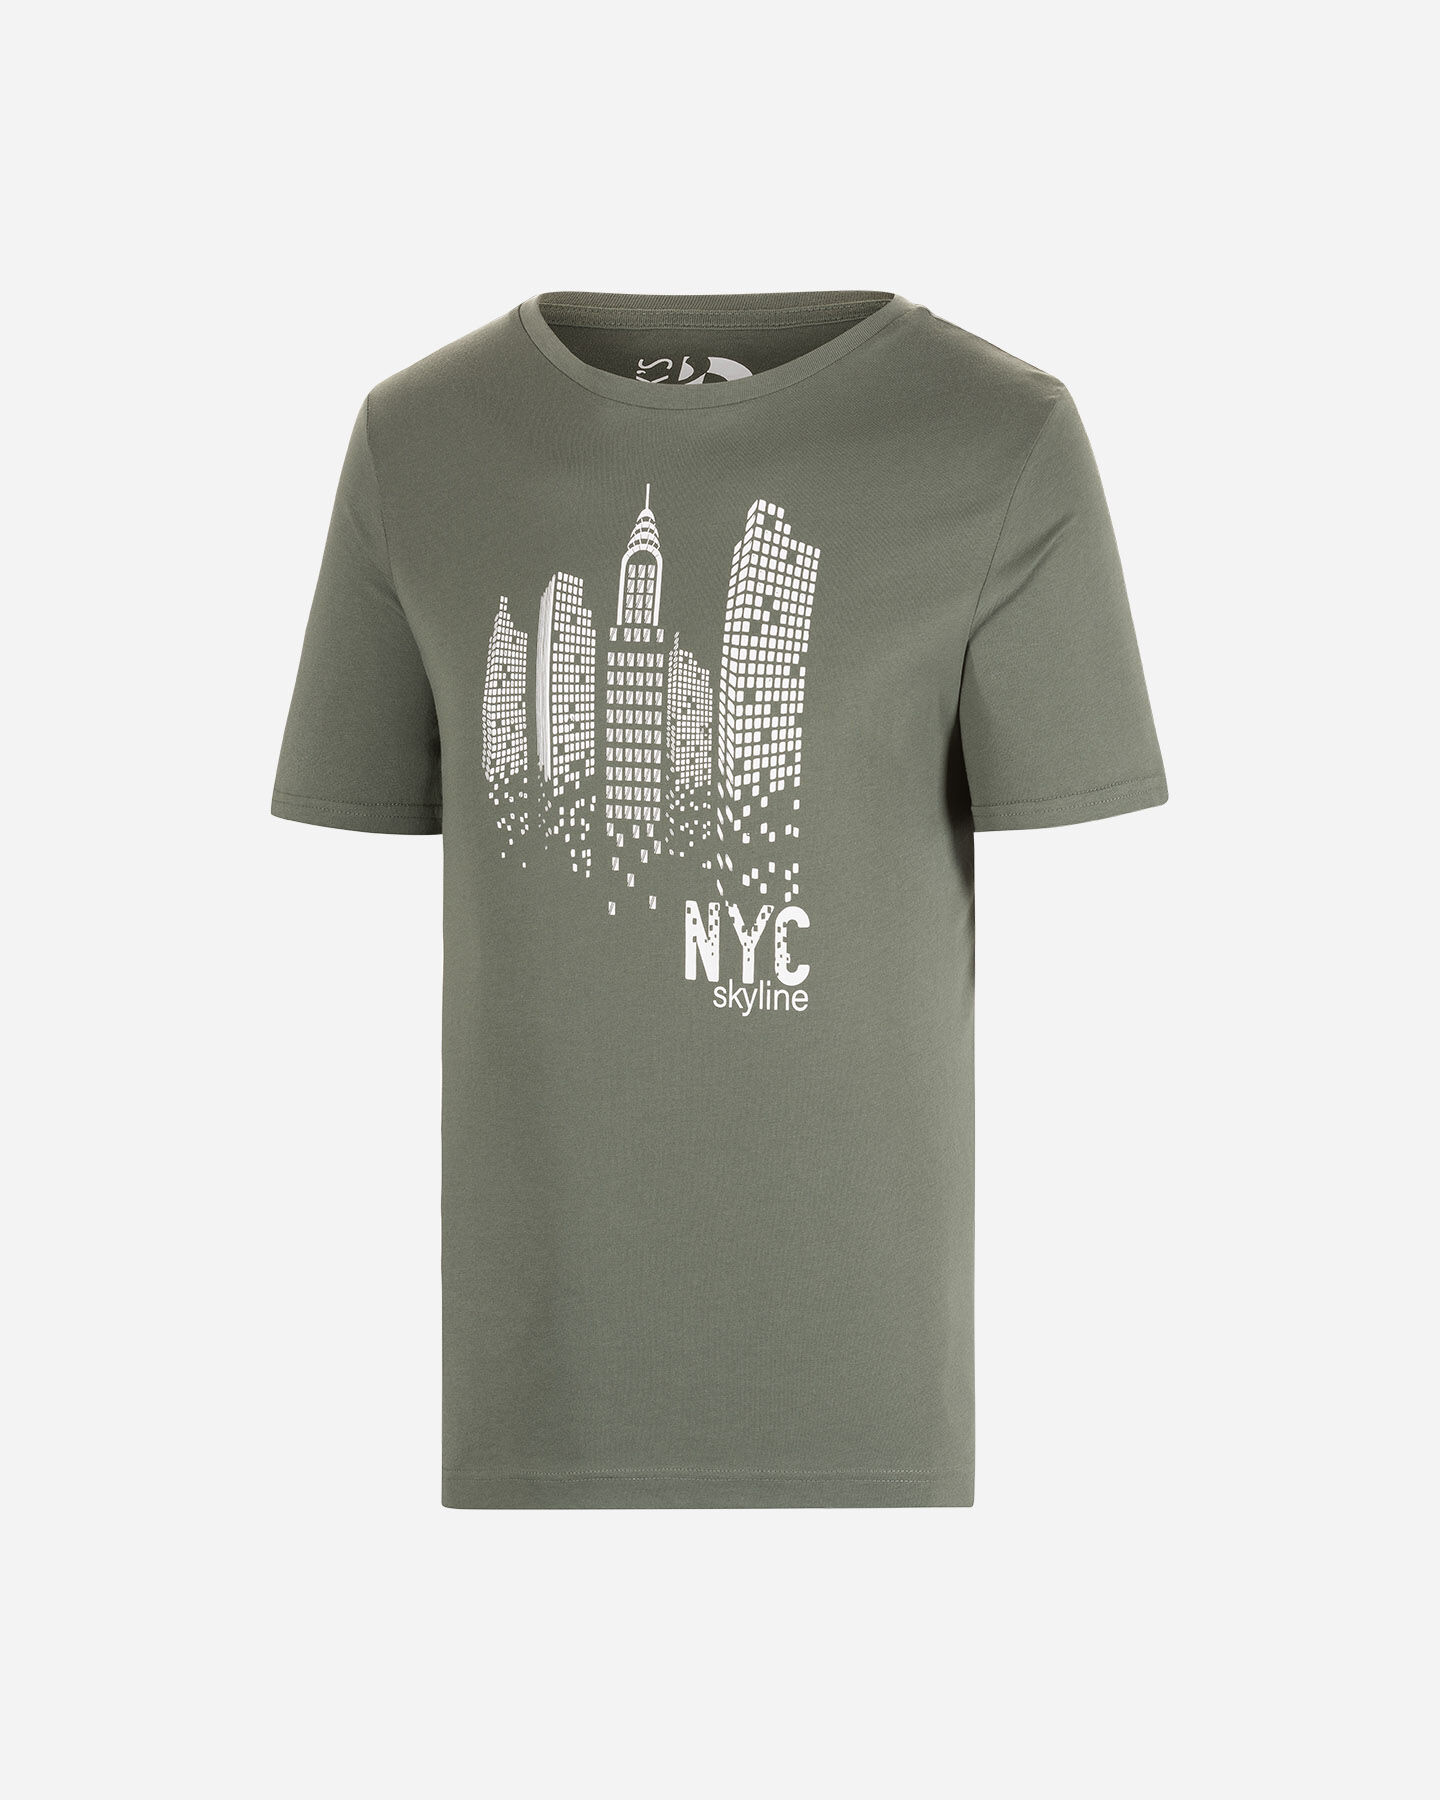  T-Shirt DACK'S NYC M S4086904|783|XS scatto 0